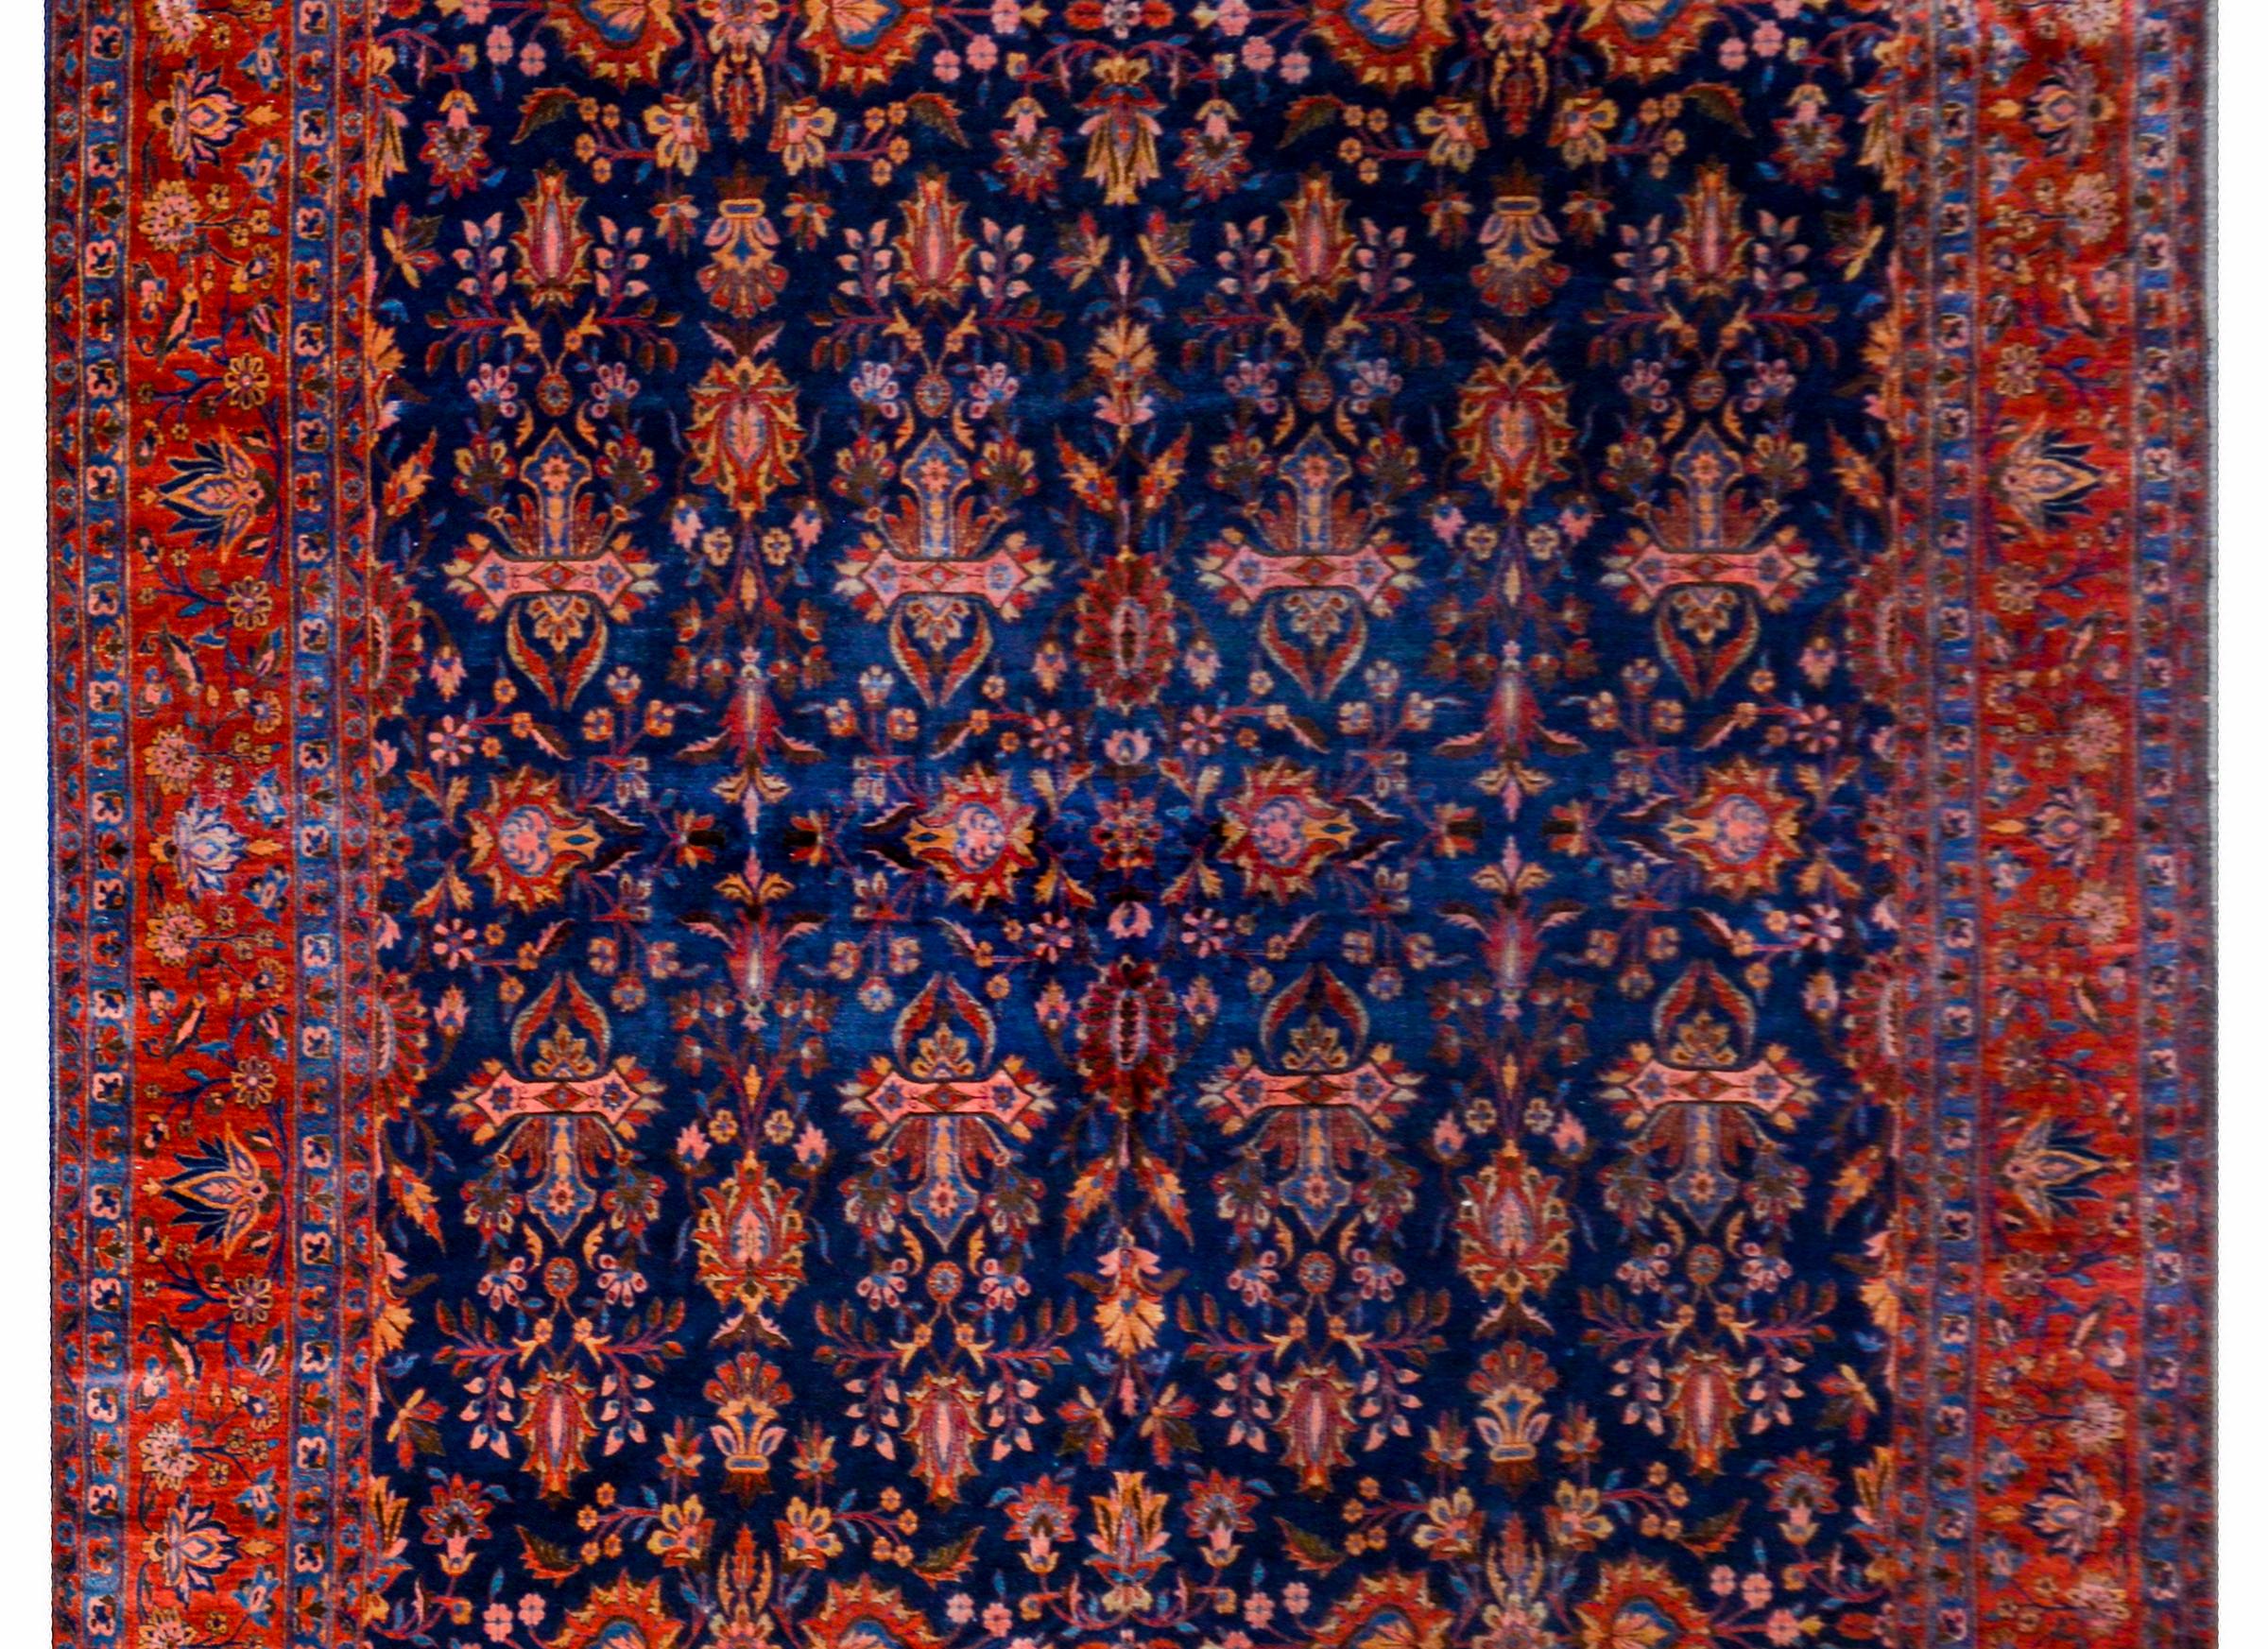 A beautiful 19th century antique Kashan rug with a central field containing myriad mirrored floral pattern woven in crimson, light and dark indigo, and gold on a dark indigo background surrounded by a wide central floral and vine stripe on a crimson